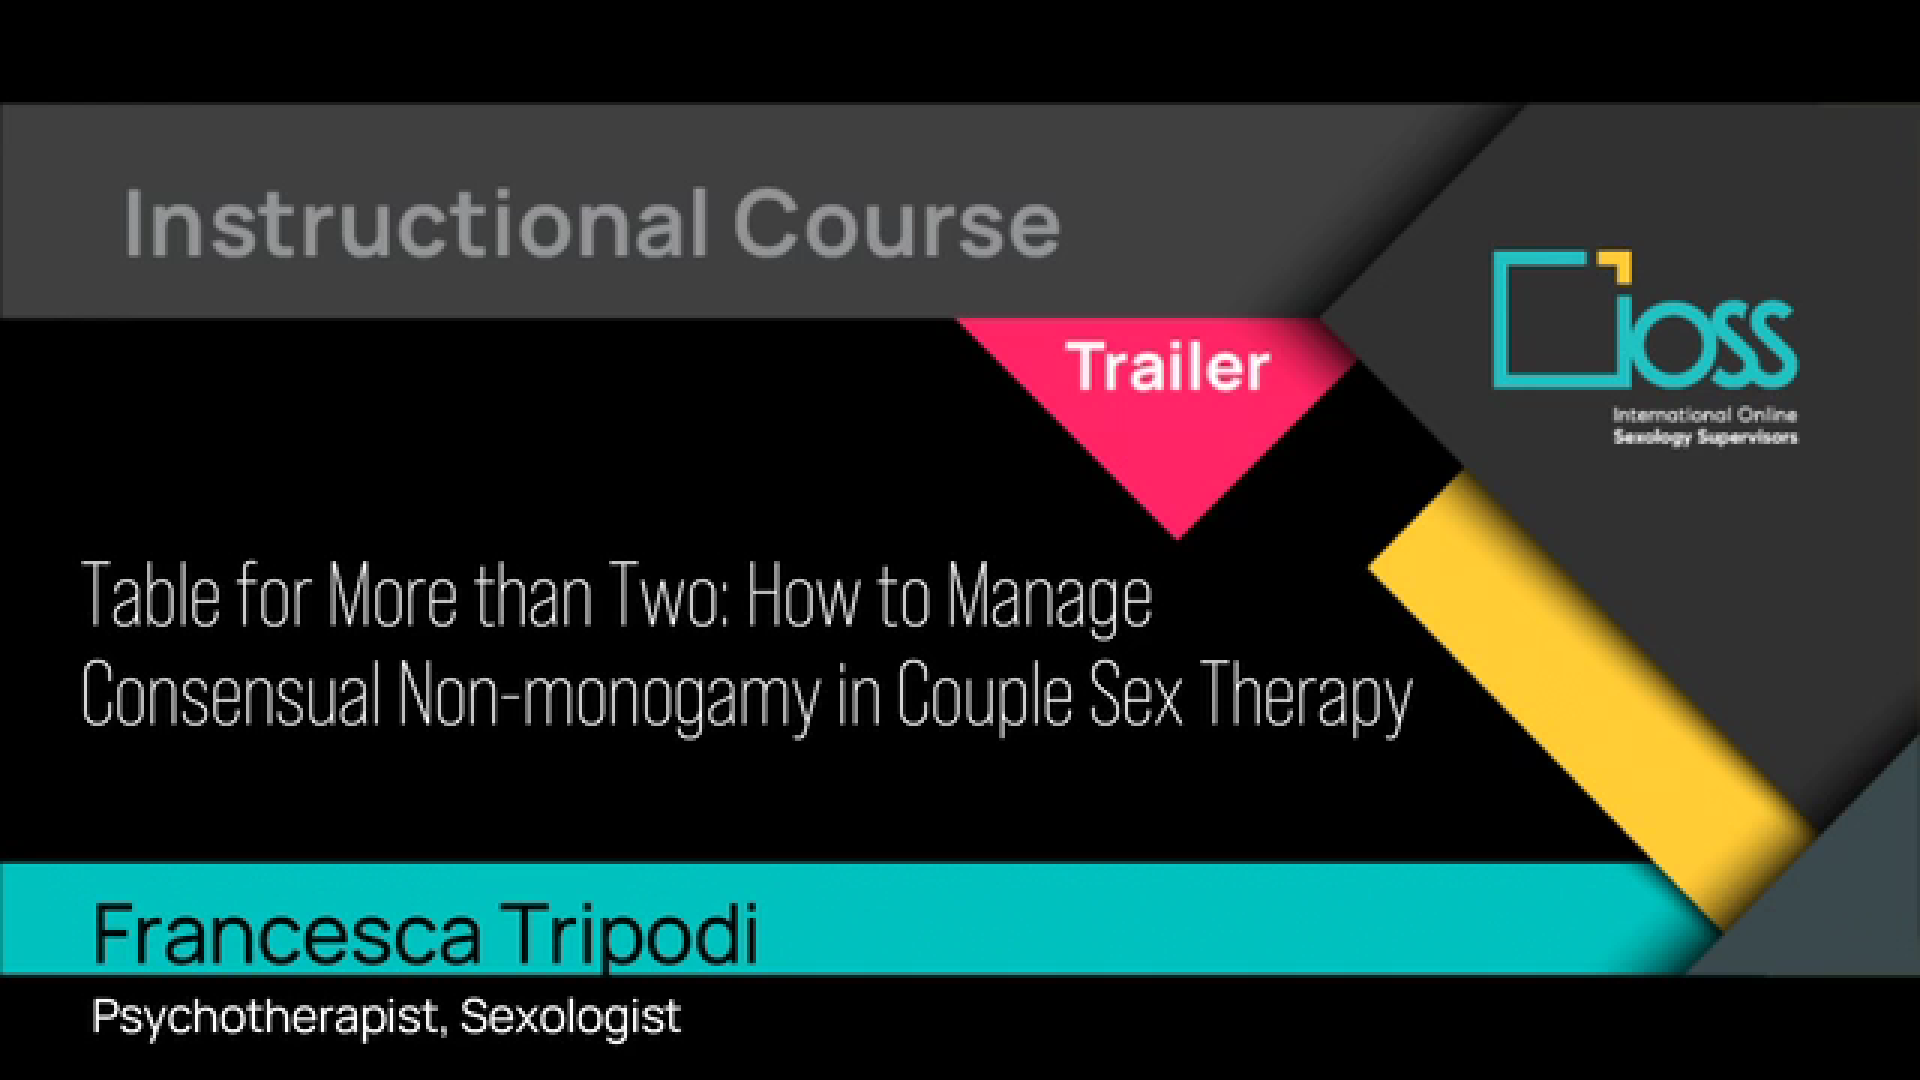 Trailer Table for More than Two: How to Manage Consensual Non-monogamy in Couple Sex Therapy (Part 1 & 2)